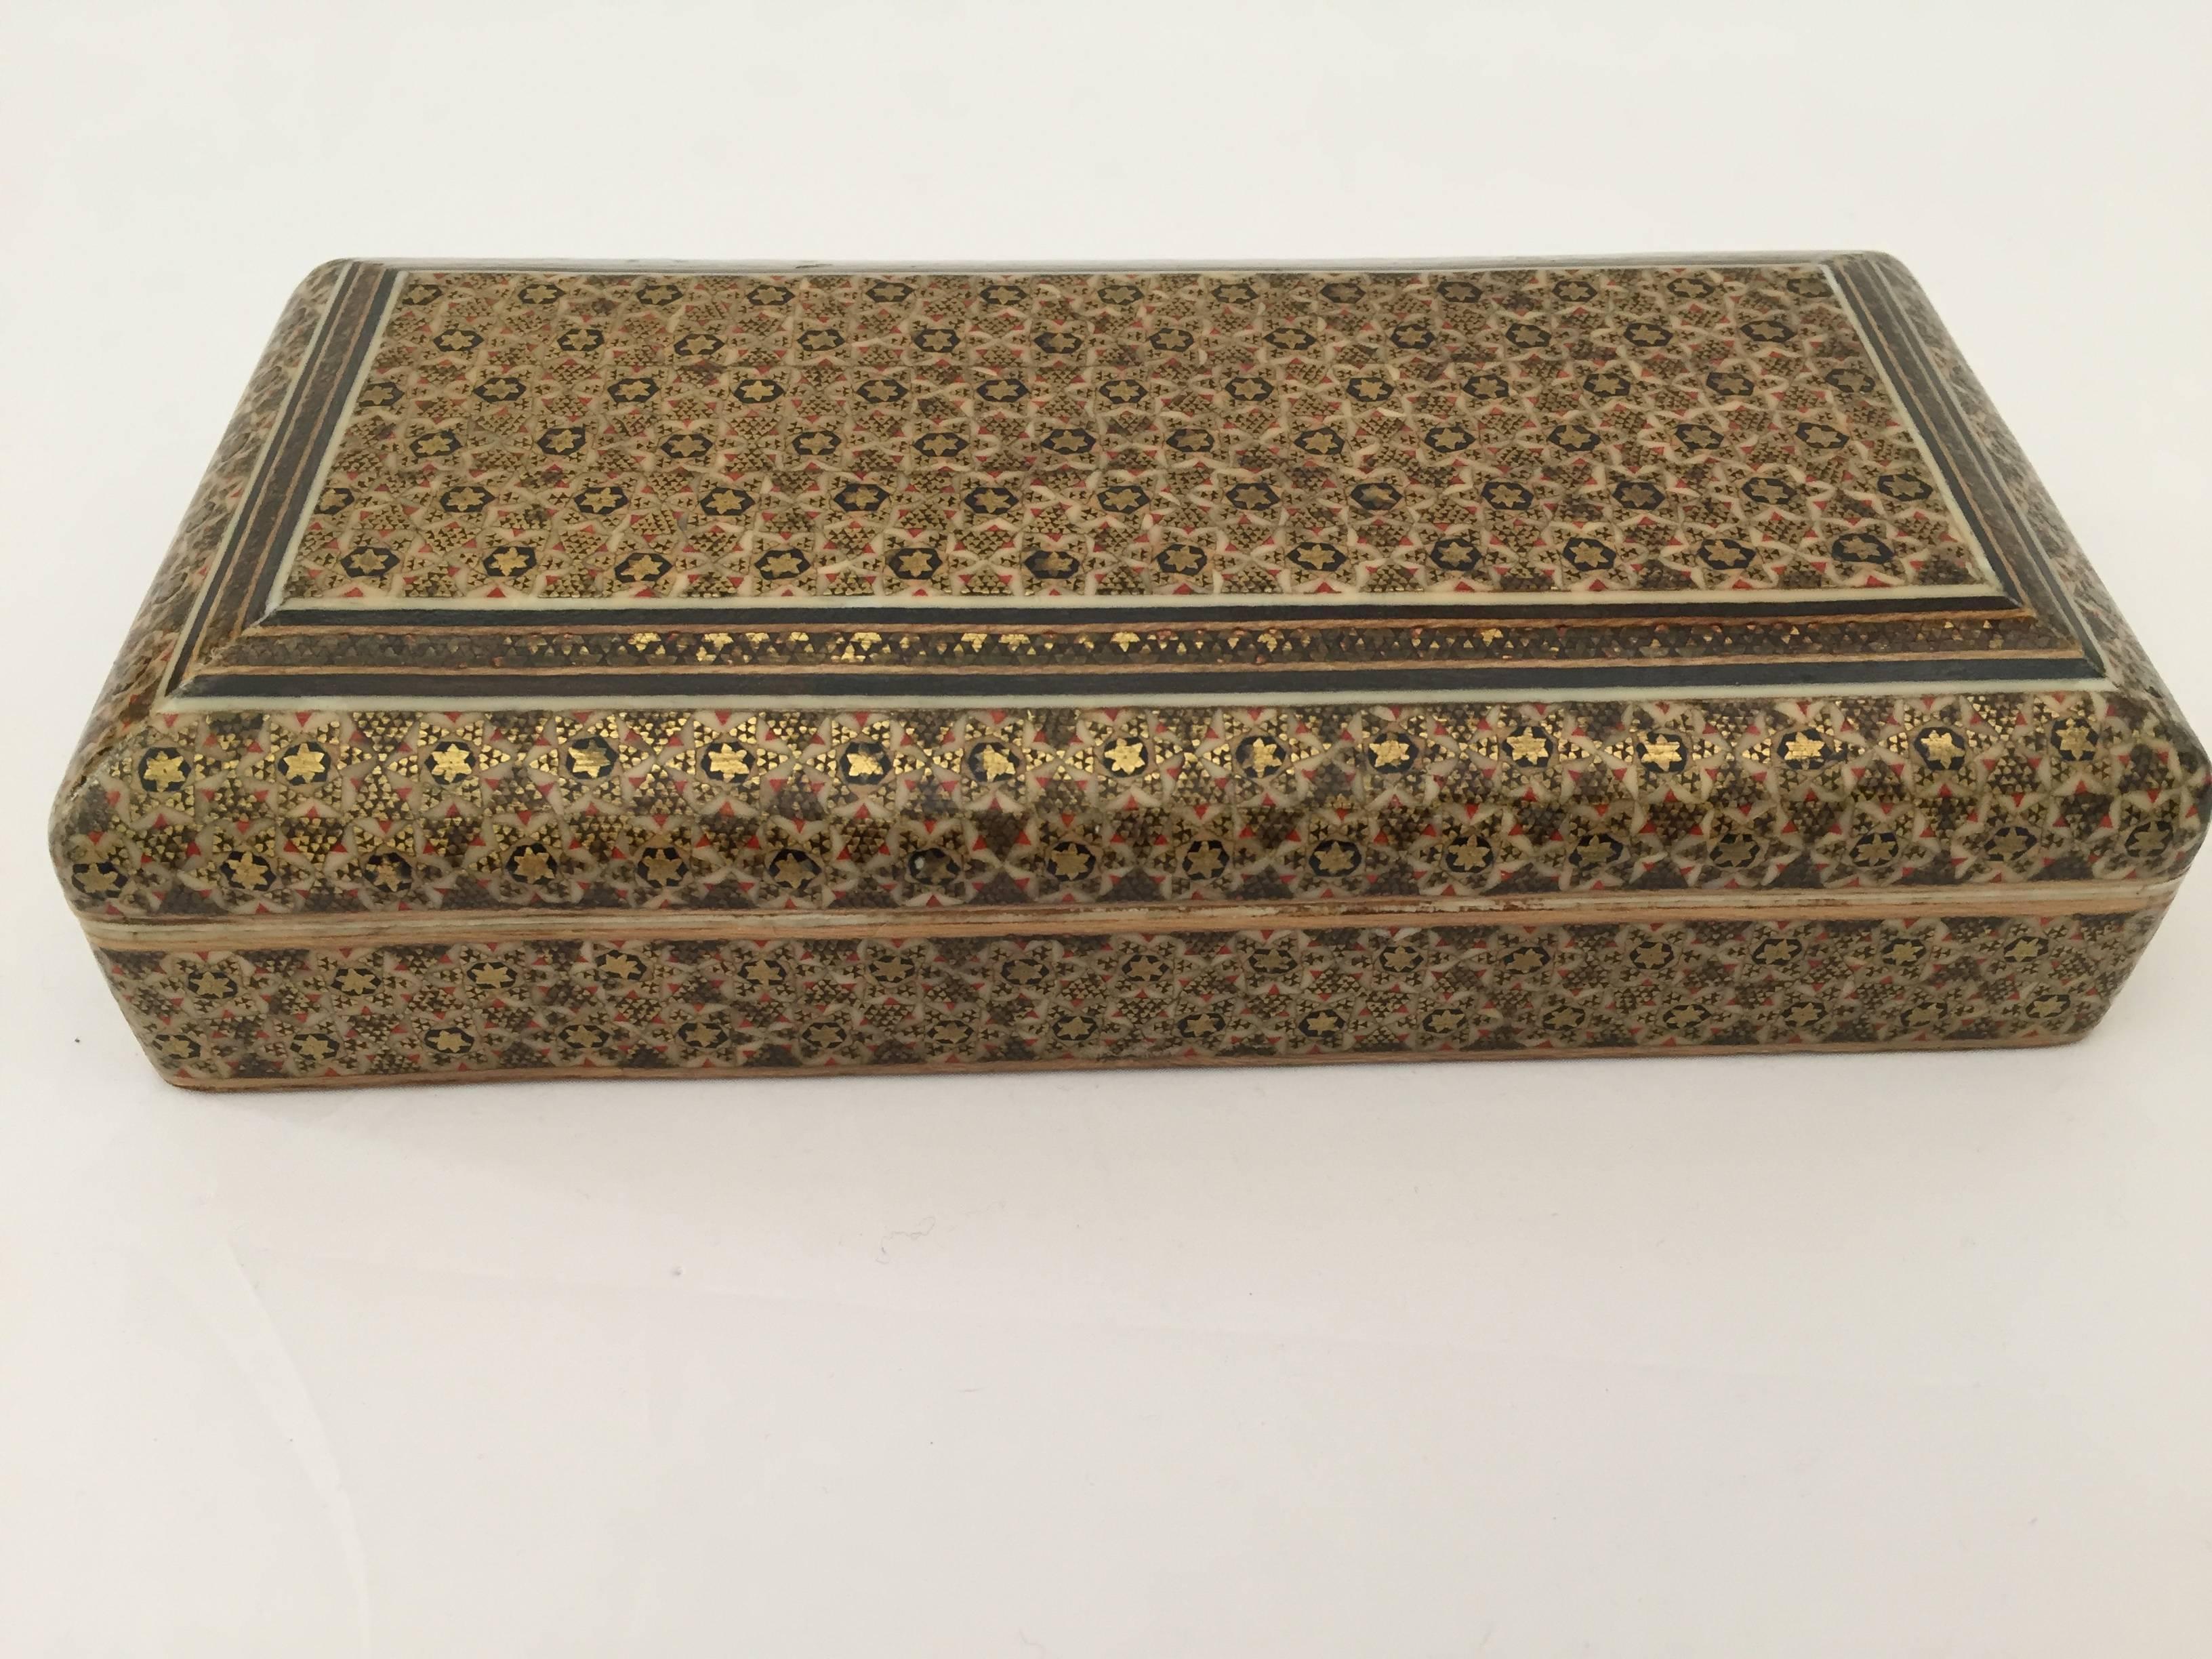 Handcrafted Khatam wooden box with very delicate micro mosaic marquetry from the ancient Persian technique of inlaying from arrangements of so many delicate pieces of wood, precious wood, and delicate miniatures paintings.
This beautiful Middle